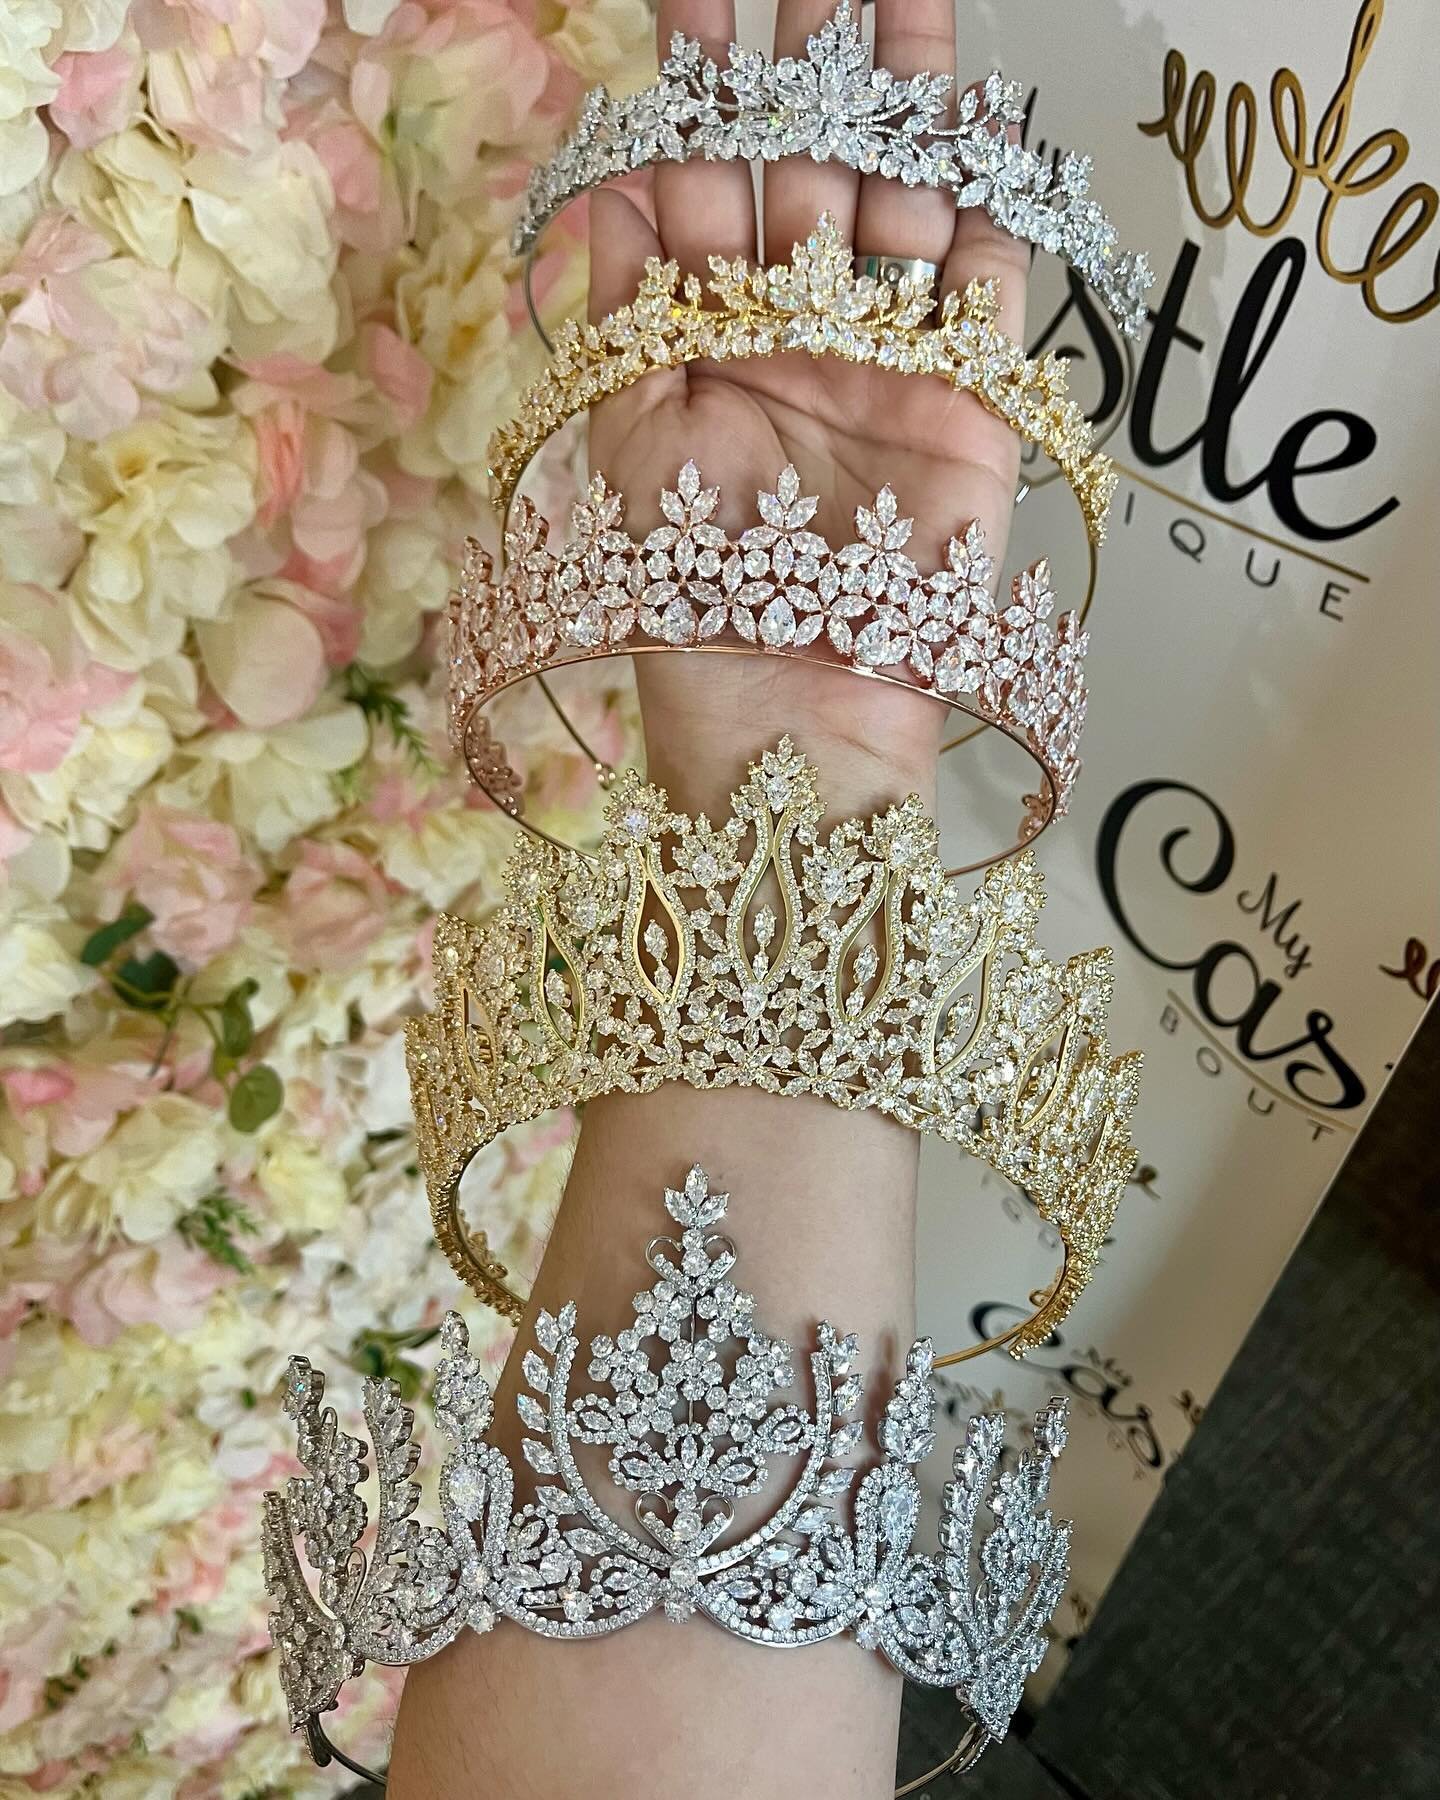 ✨CROWNS 👑 CROWNS 👑 CROWNS 👑 ✨
✨✨
✨✨✨
✨✨✨✨
✨✨✨✨✨
✨✨✨✨
✨✨✨
✨✨
✨
#mycastleboutique #pearland #pearlandtx #quincea&ntilde;era #quinceanera #quince #ballgown #sweet15 #dresses #partydress #vestidosdequince #xv #prom #dress #quinceaneradress #quincea&nt